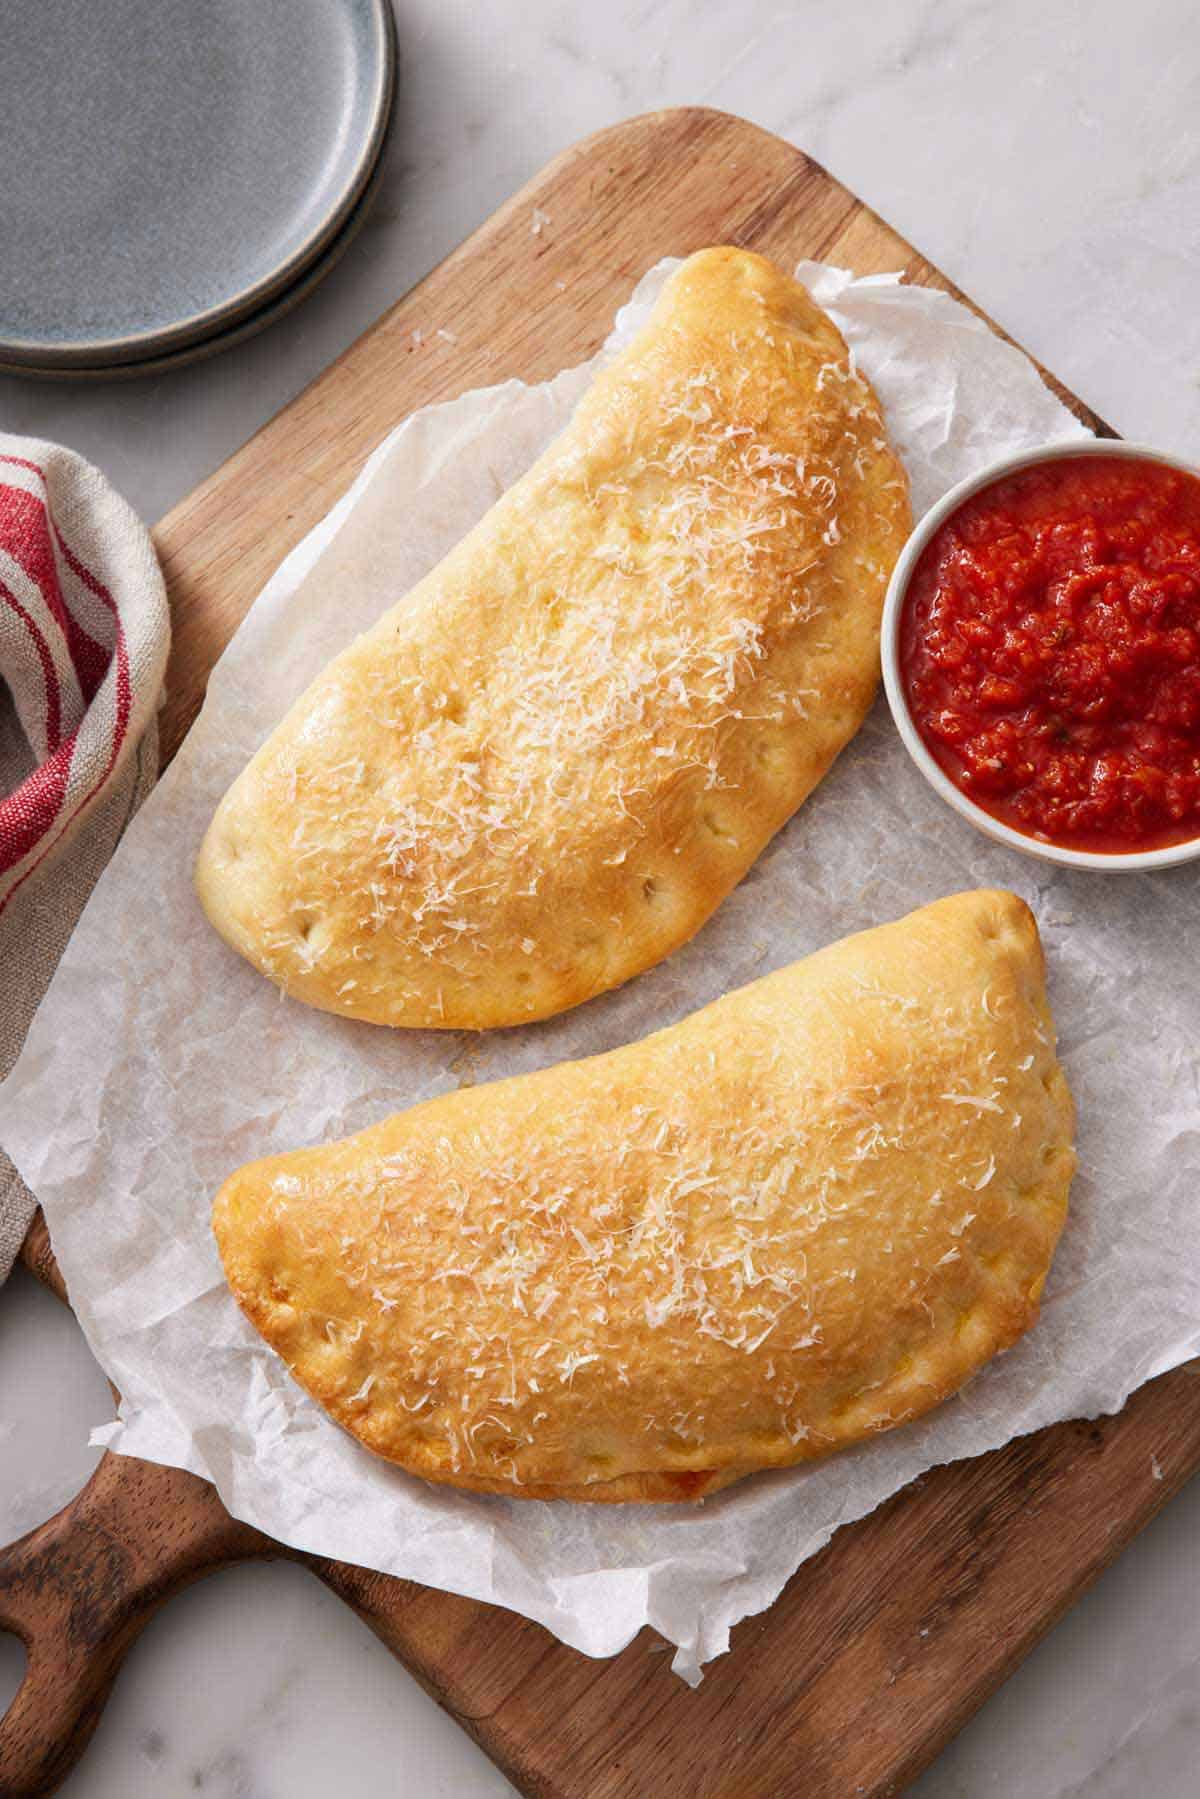 Overhead view of two calzones on a sheet of parchment over a wooden serving board with a bowl of pizza sauce.